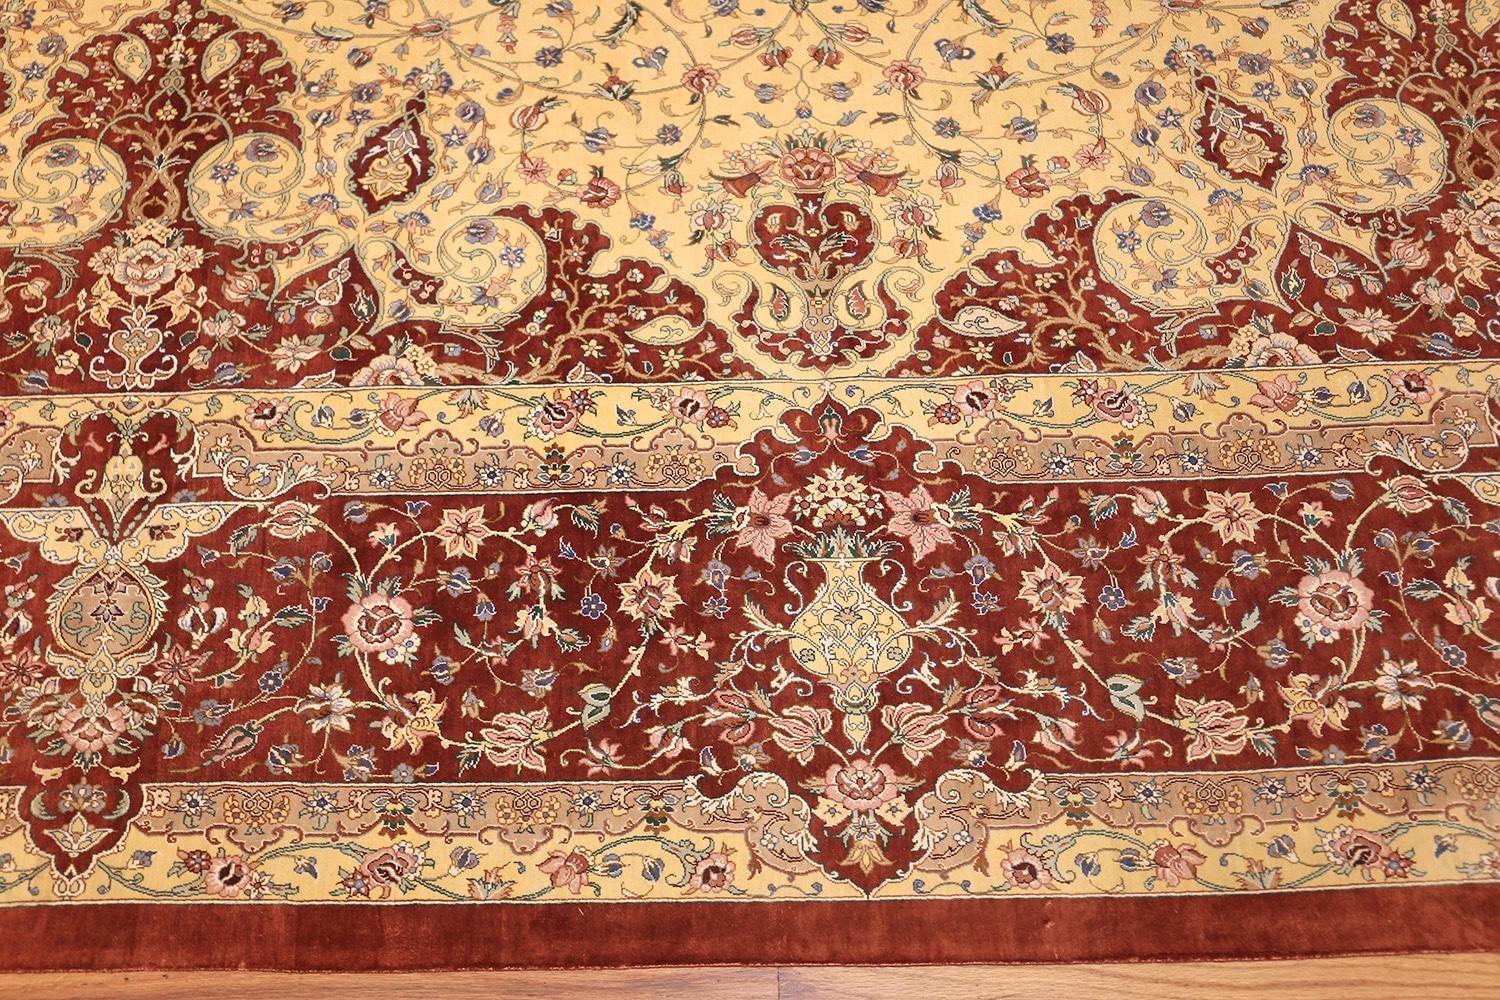 Silk Room Size Persian Qum Rug, Country of Origin / Rug Type: Modern Persian Rug, Circa date: Late 20th Century. Size: 9 ft 6 in x 13 ft 6 in (2.9 m x 4.11 m)

